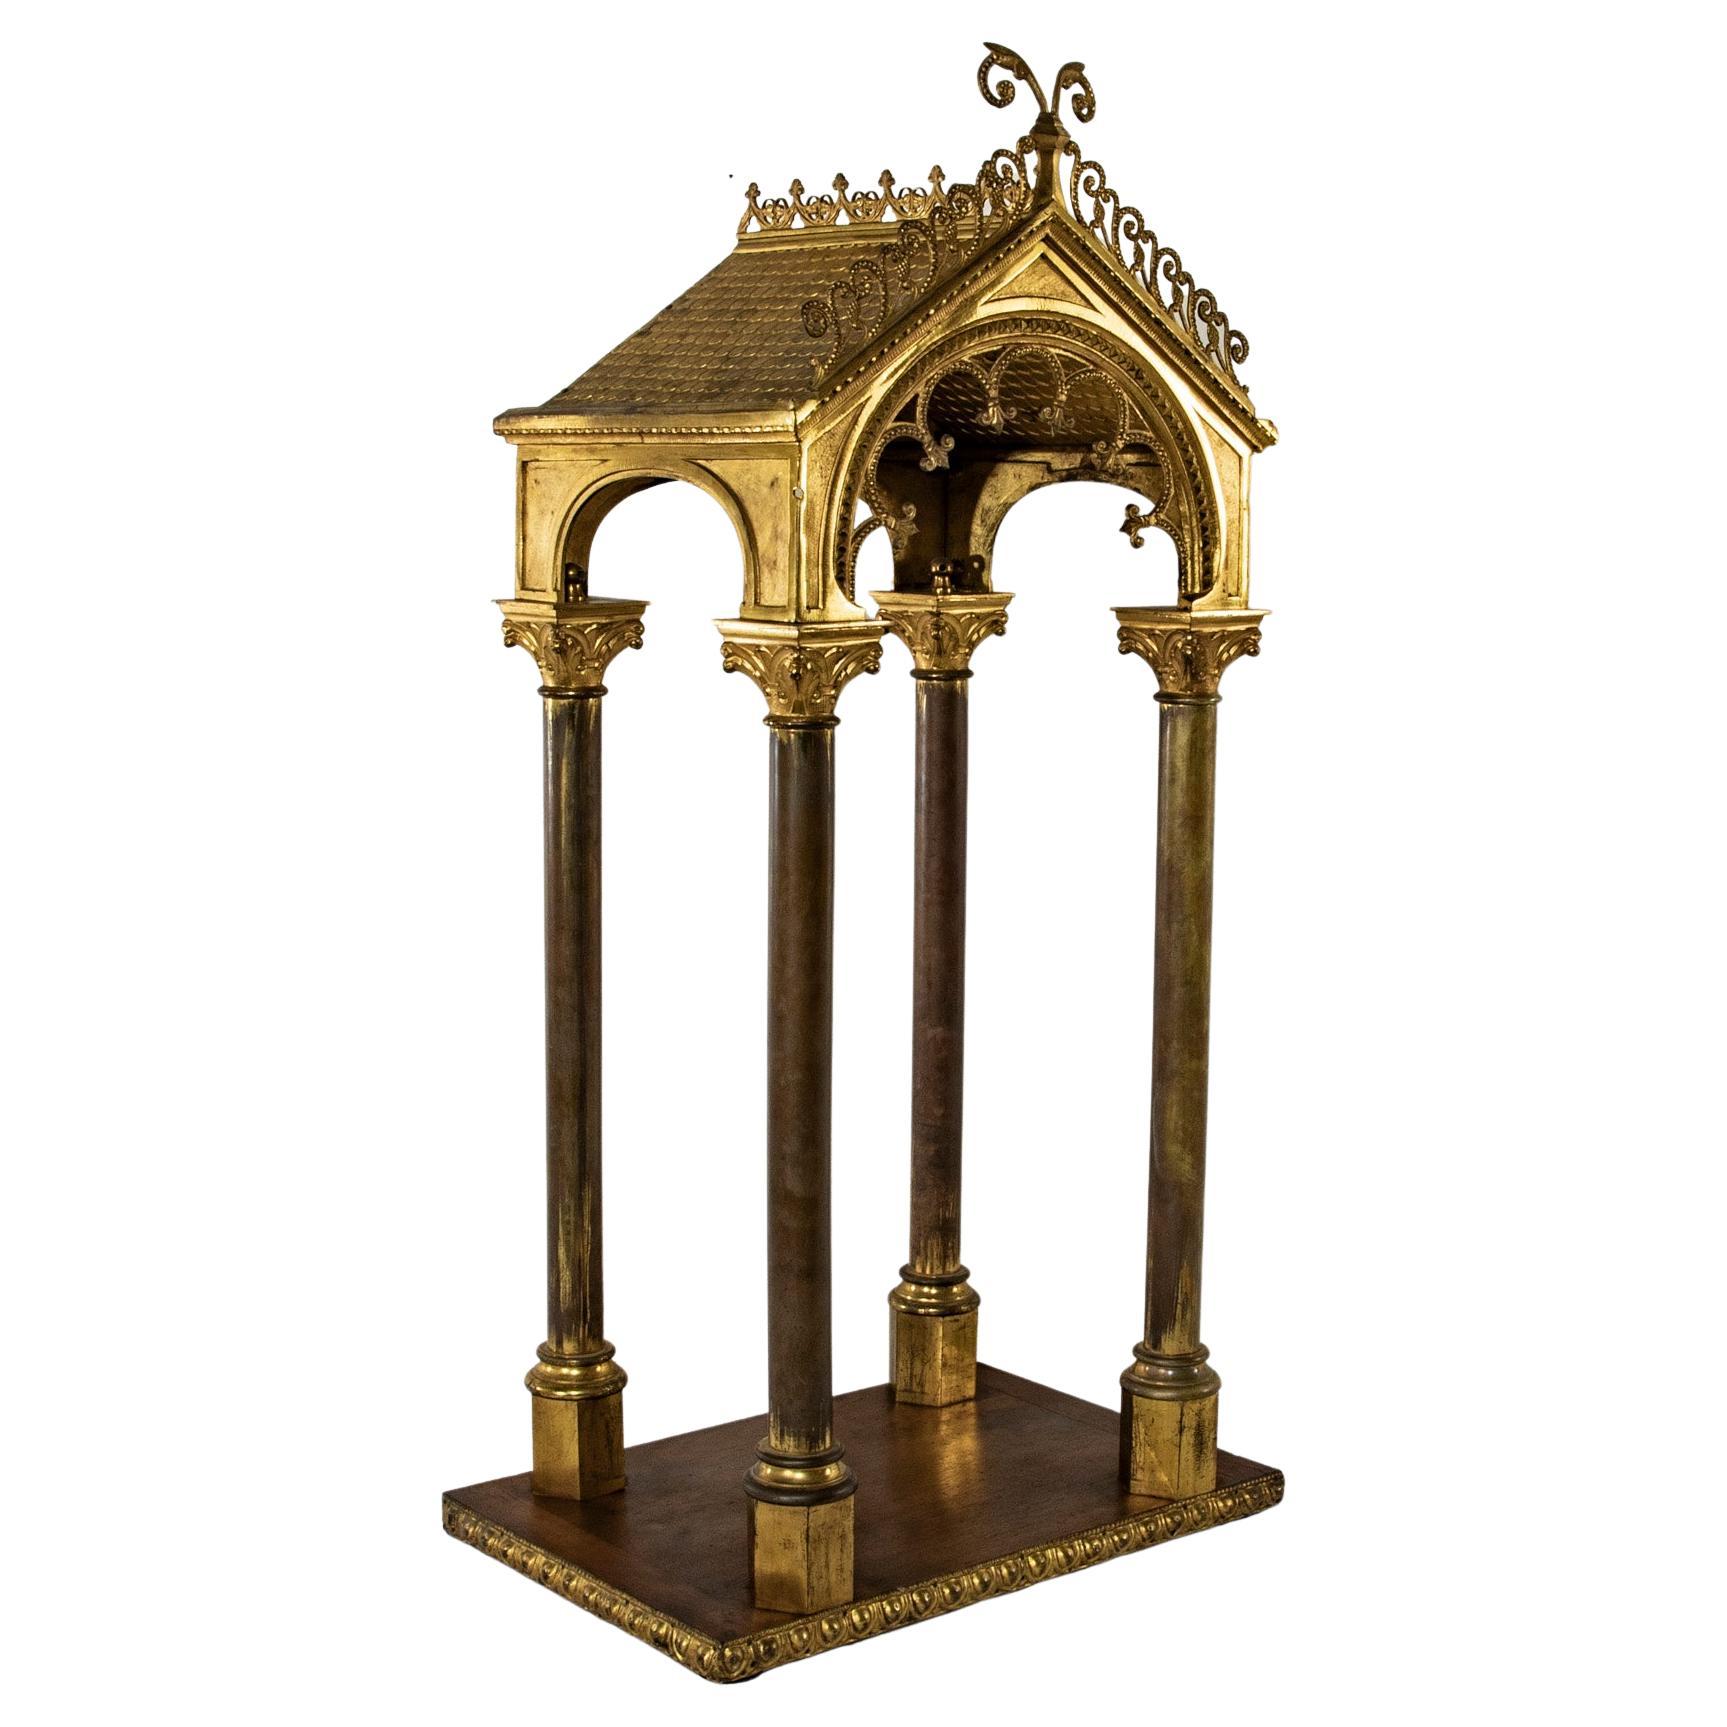 Early 20th Century Italian Gilt Brass and Wooden Altar or Sculpture Stand For Sale